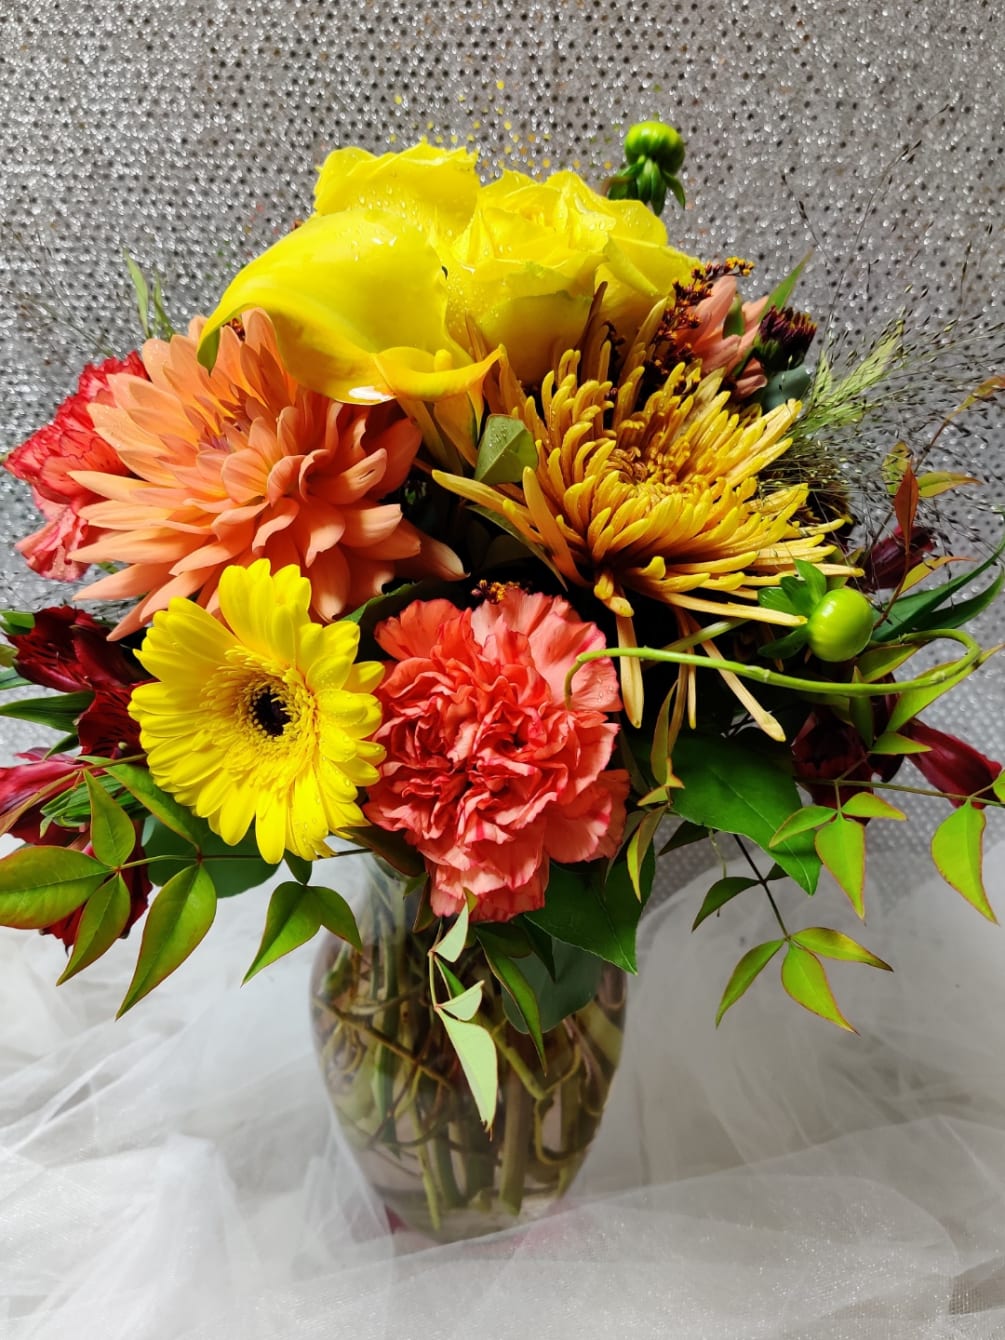 Includes calla lilies, dahlia, mums, carnations, gerbera daisies, willow, and greenery